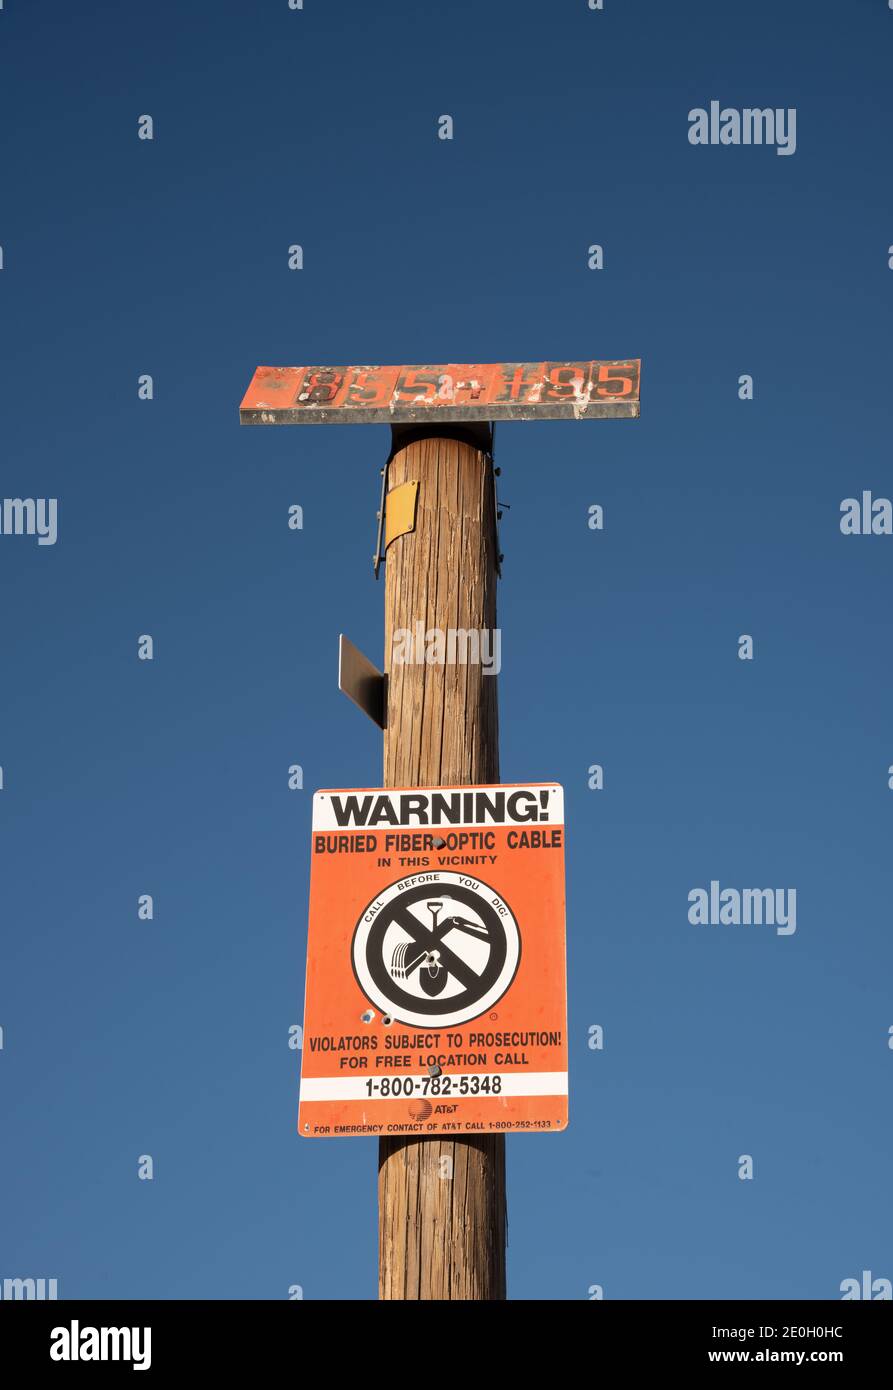 An orange caution sign on a wooden pole warns against digging in that area because of buried cable. Stock Photo